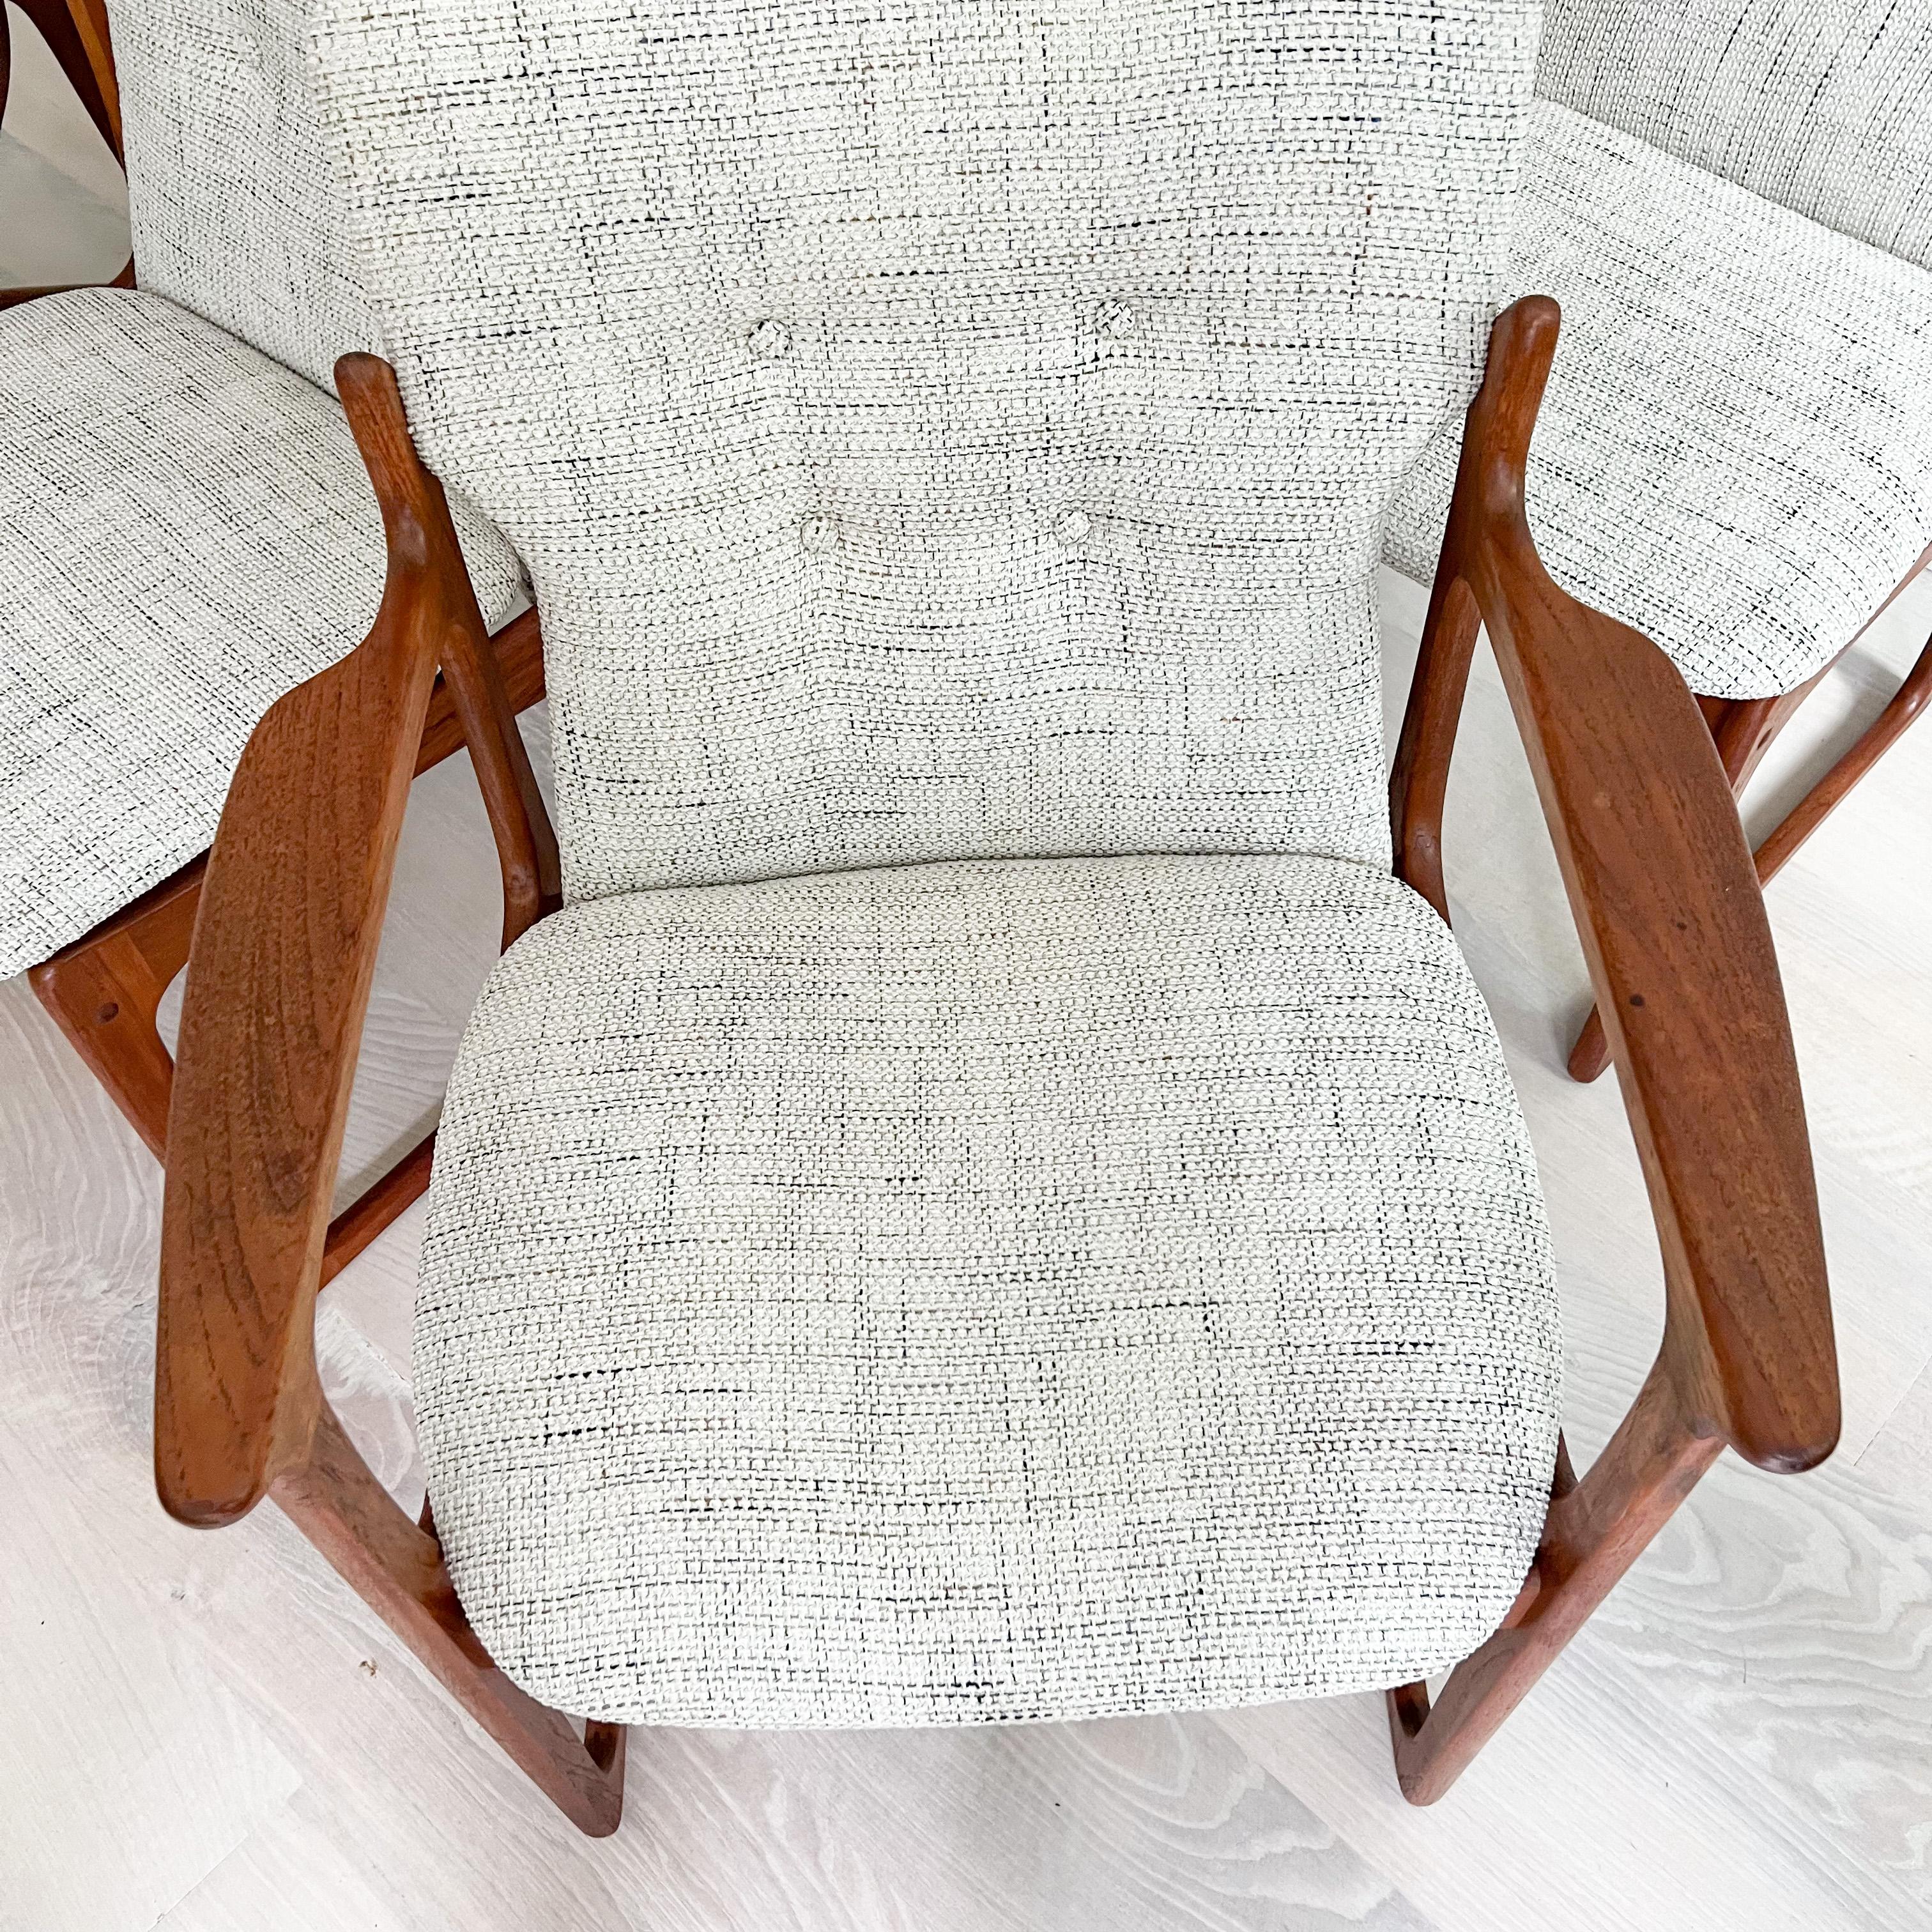 Late 20th Century Set of 6 Mid Century Danish Teak Dining Chairs with New Upholstery by Art Furn